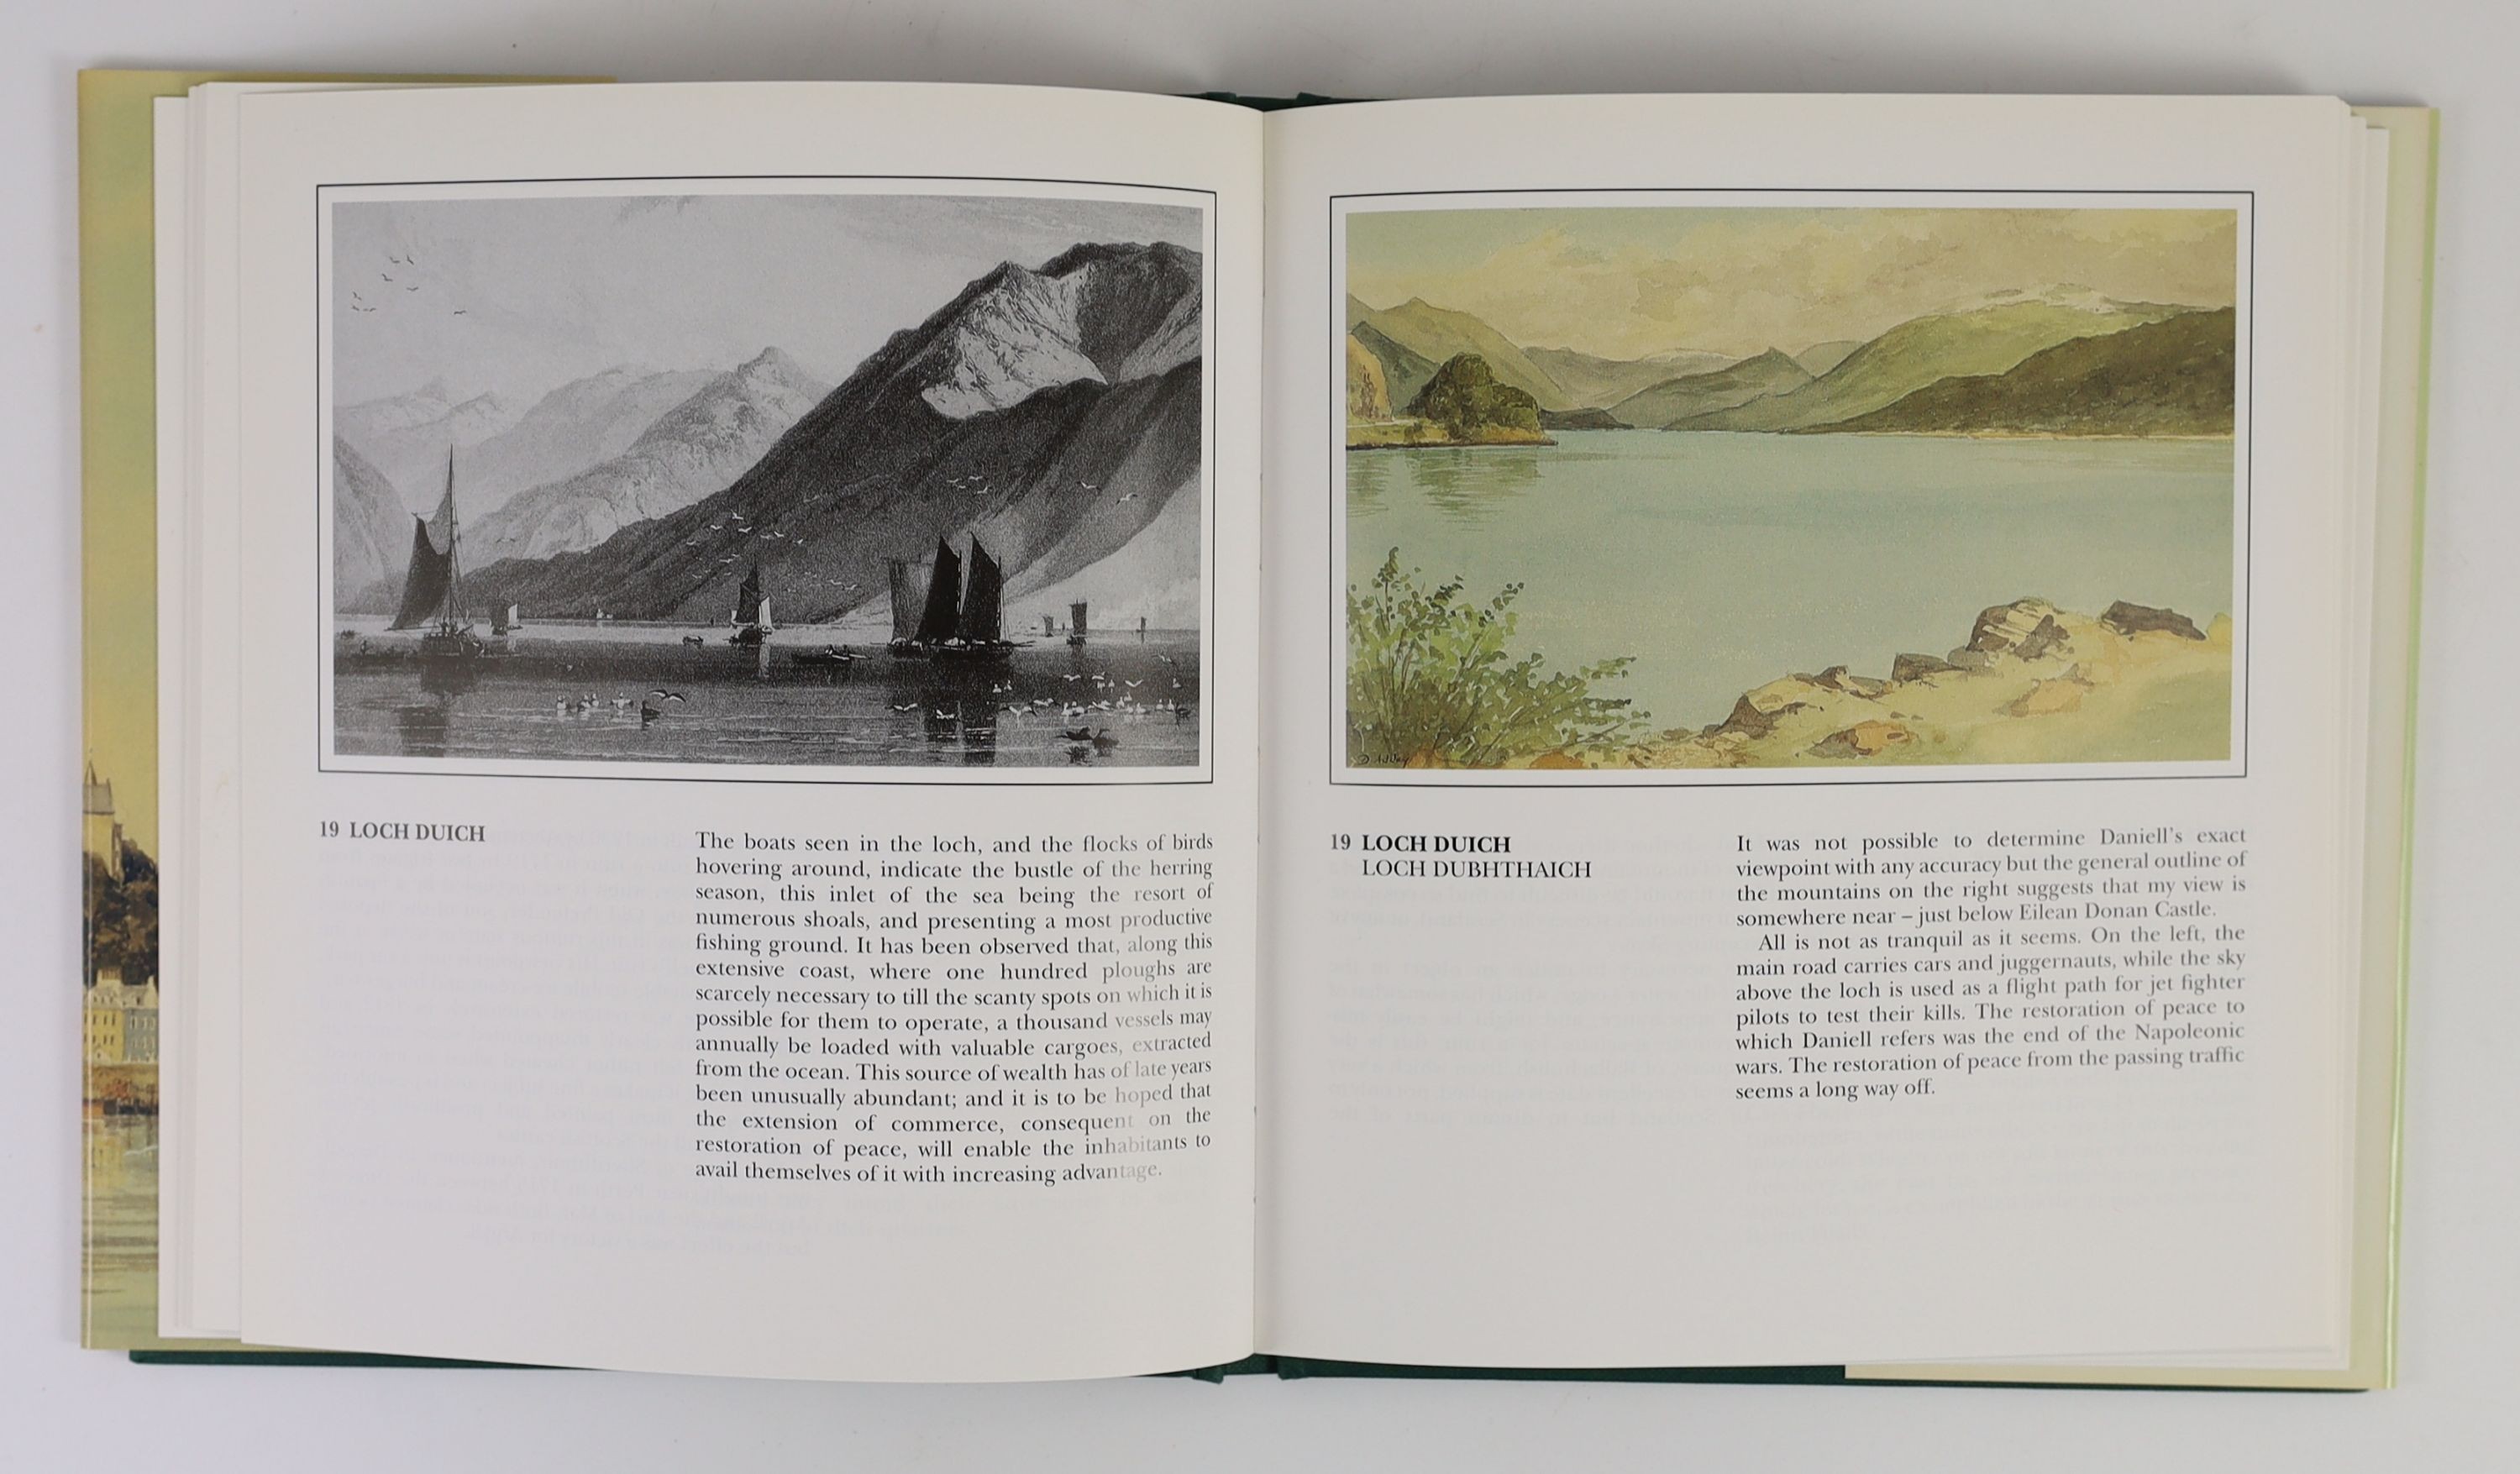 Addey, David - A Voyage Round Great Britain. 1st ed. 4 vols. Vols 3 and 4 signed by author. Each volume adorned with coloured illustrations throughout. Each in publishers cloth with gilt letters on spine and original pic